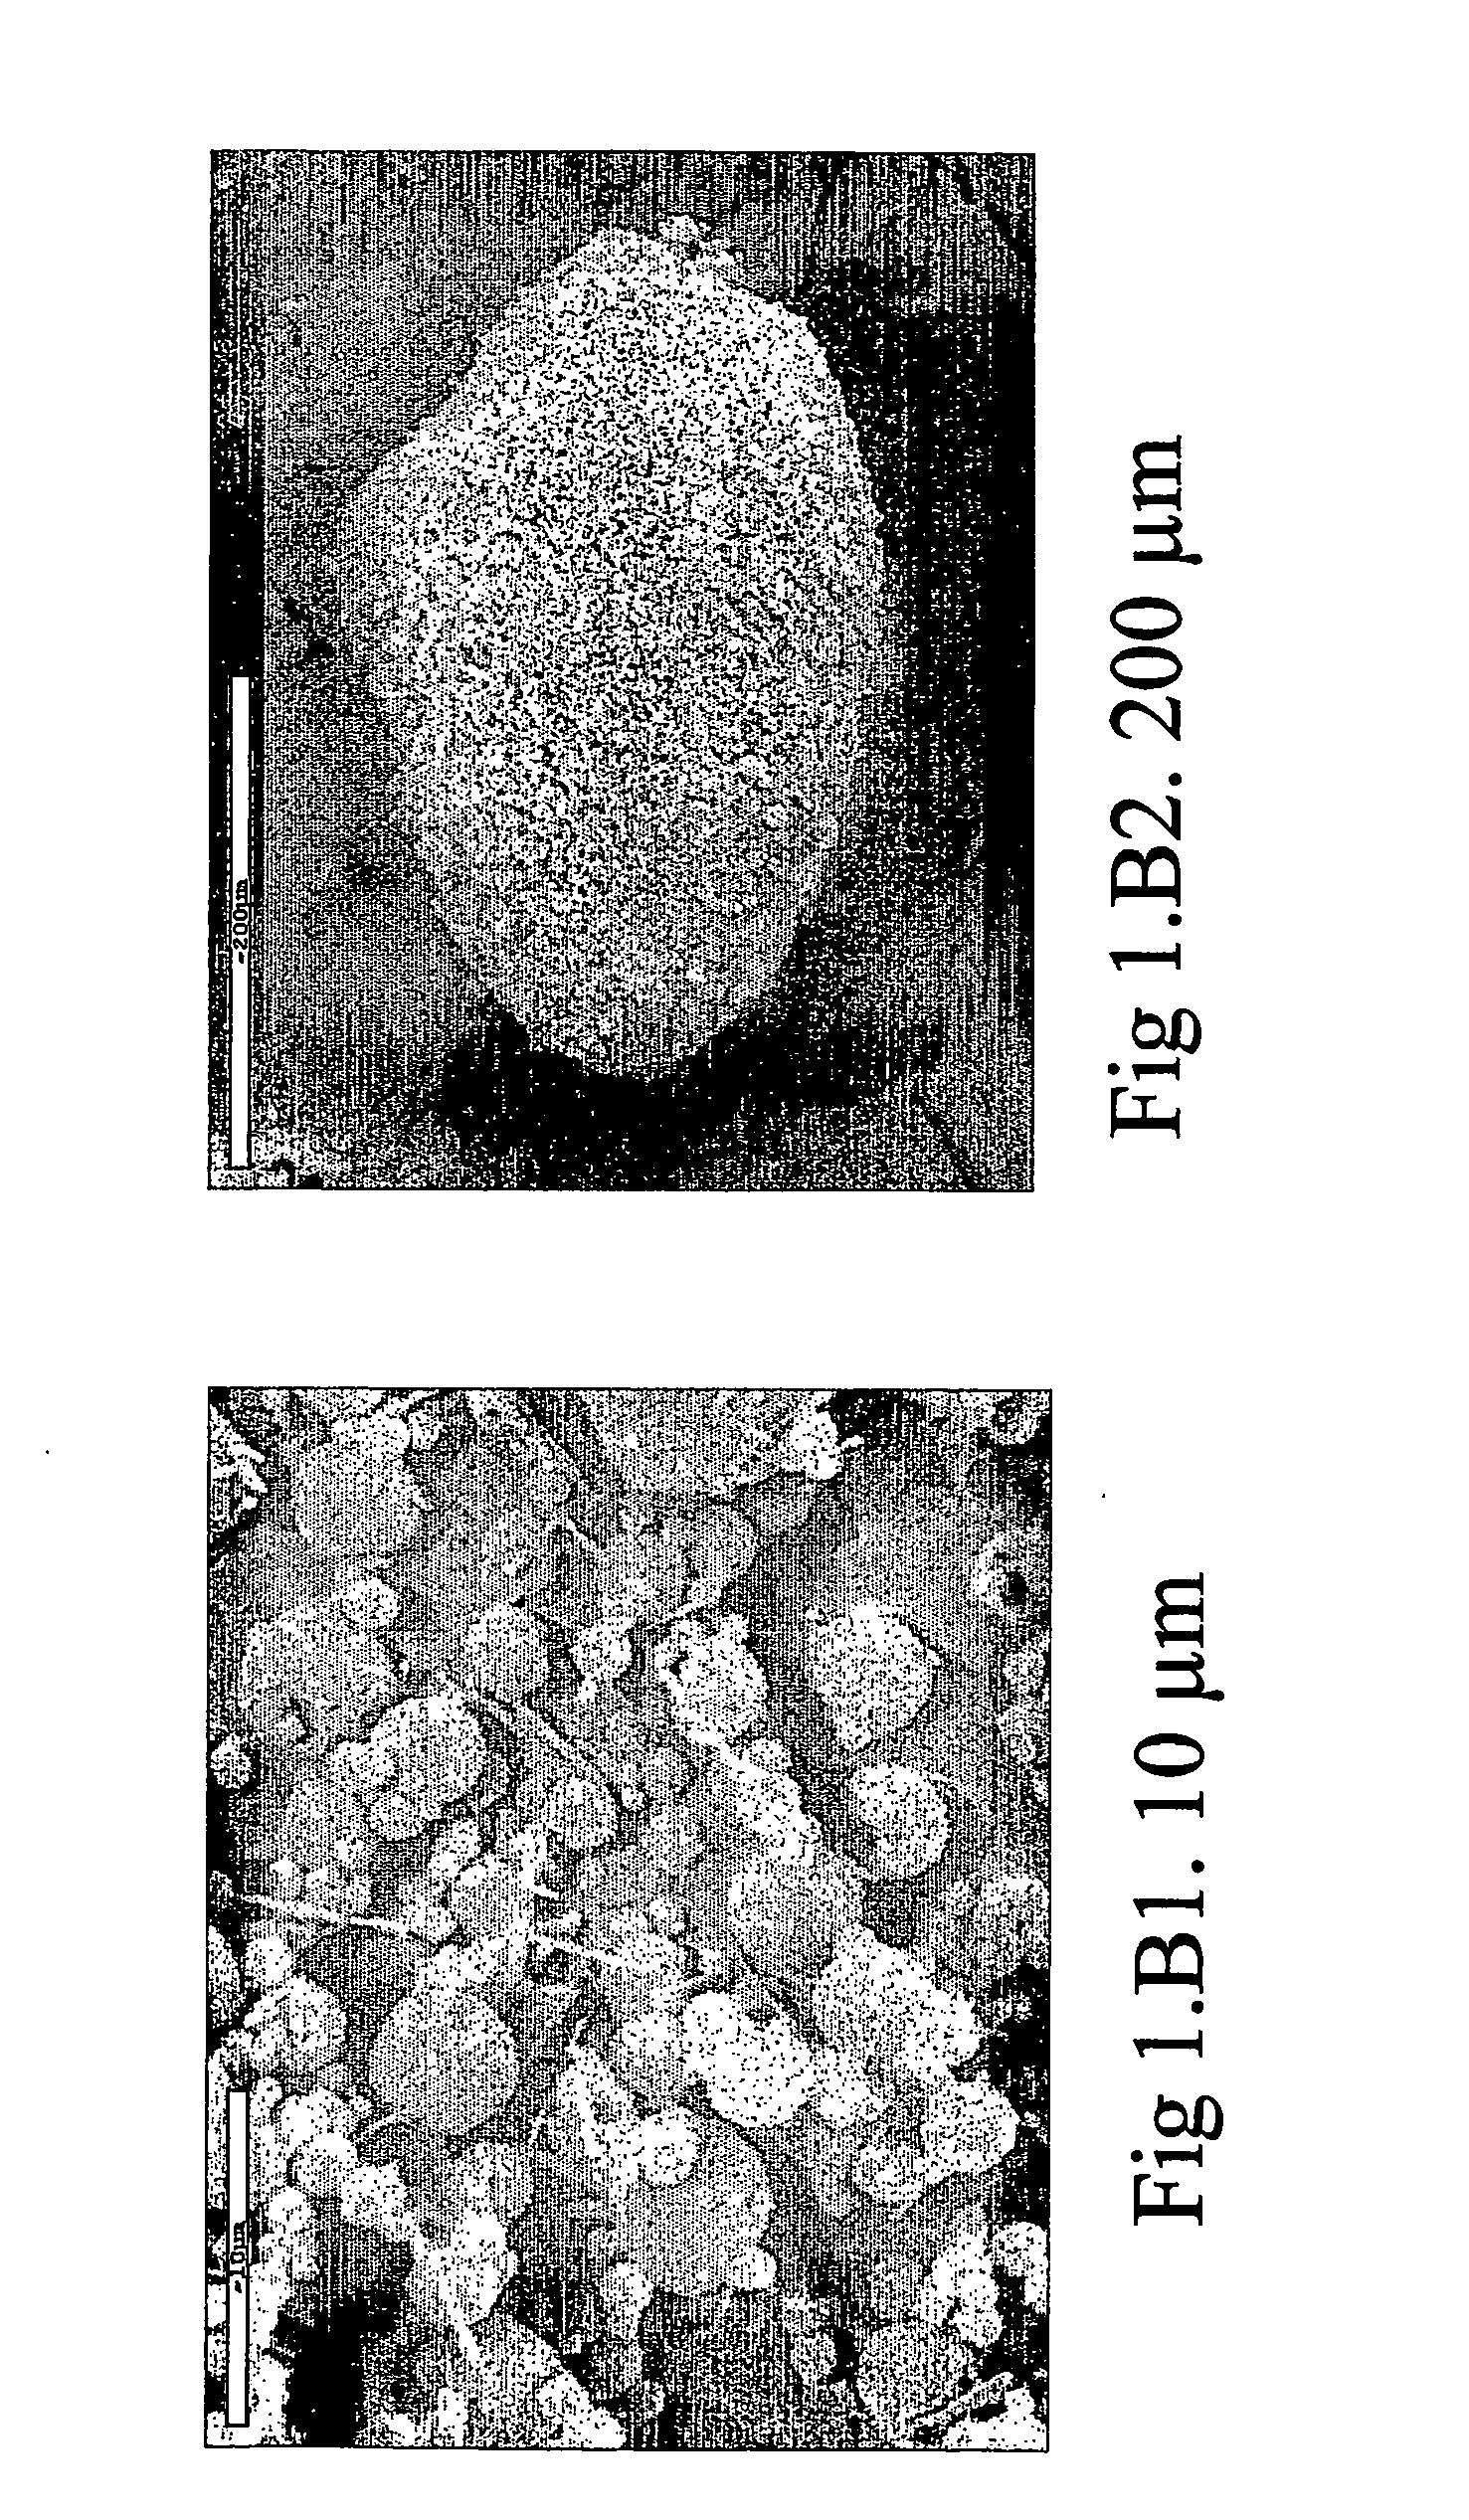 Powder for nasal administration of drugs